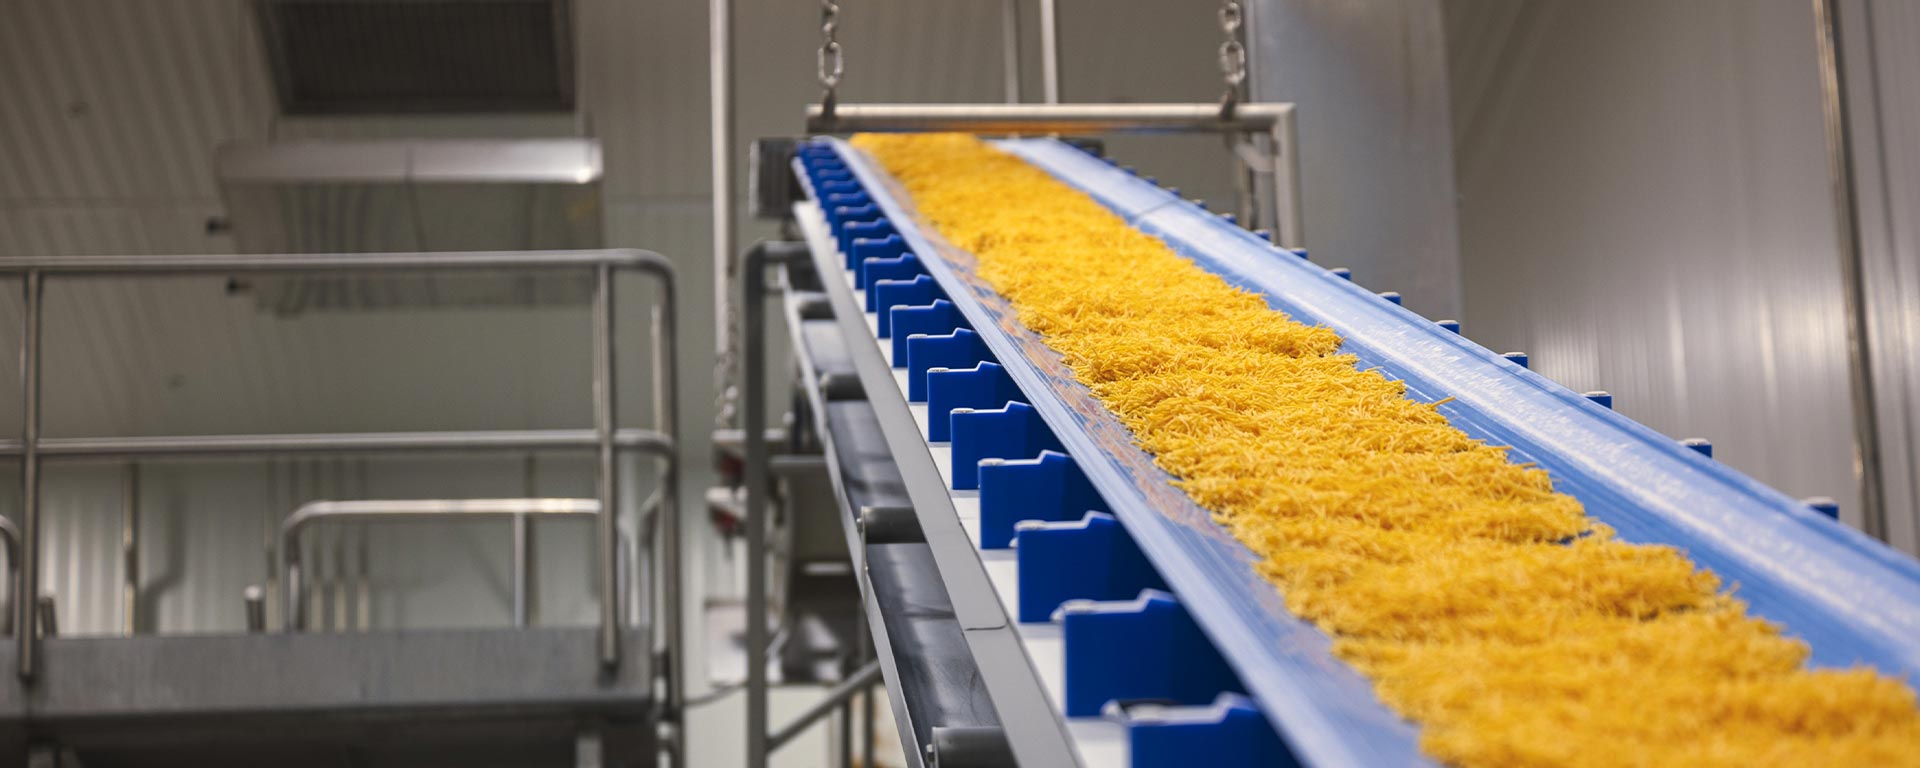 Shredded cheese being sorted during production